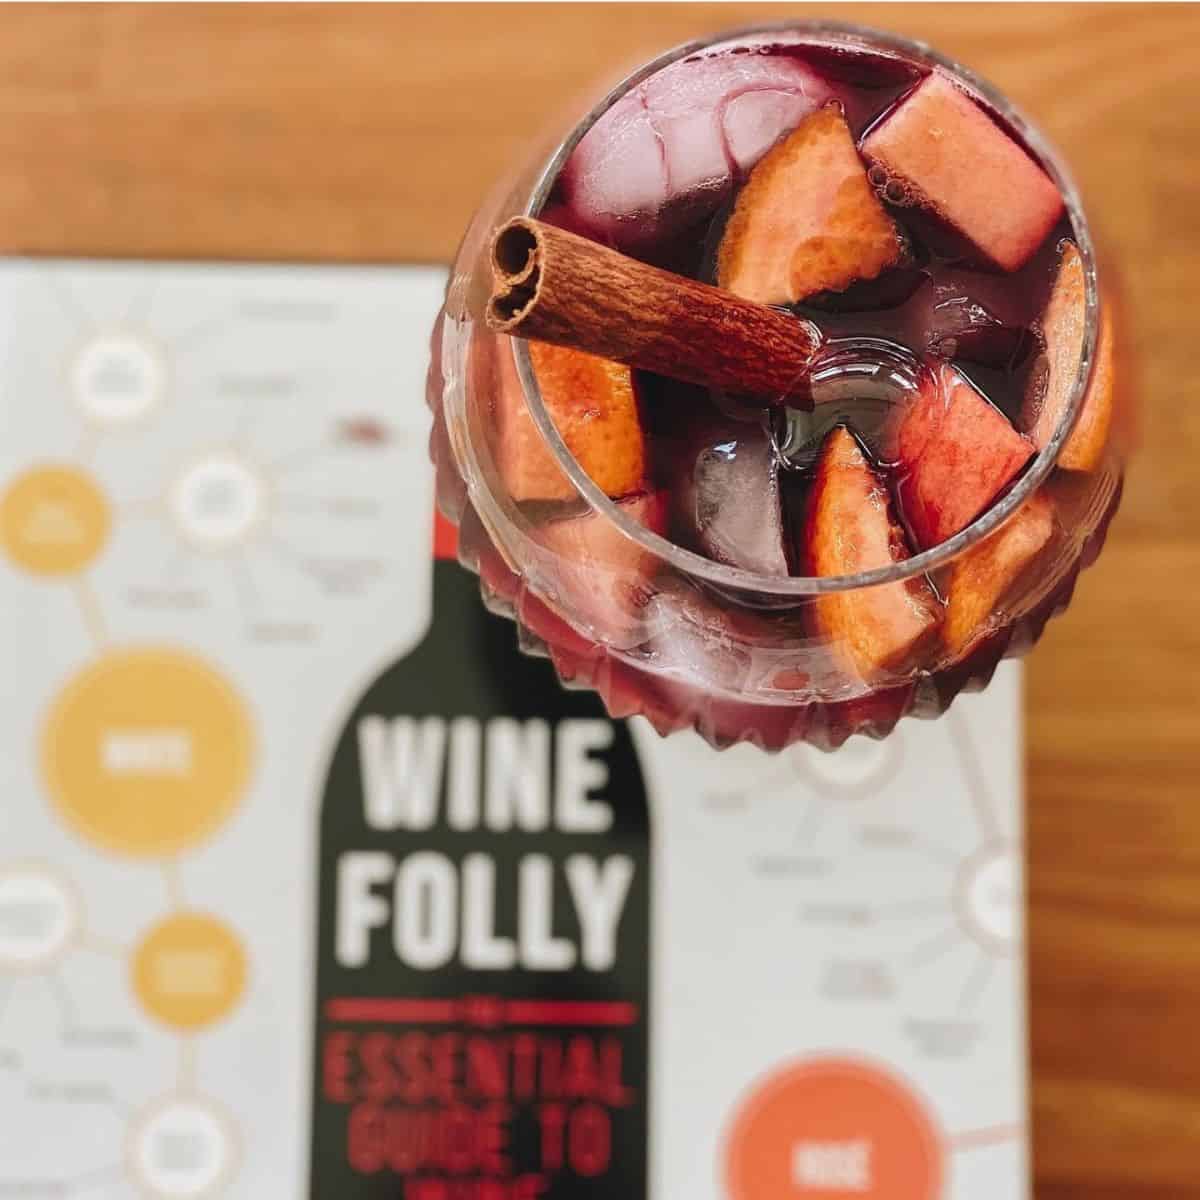 overhead view of red sangria in a glass with a wine book.